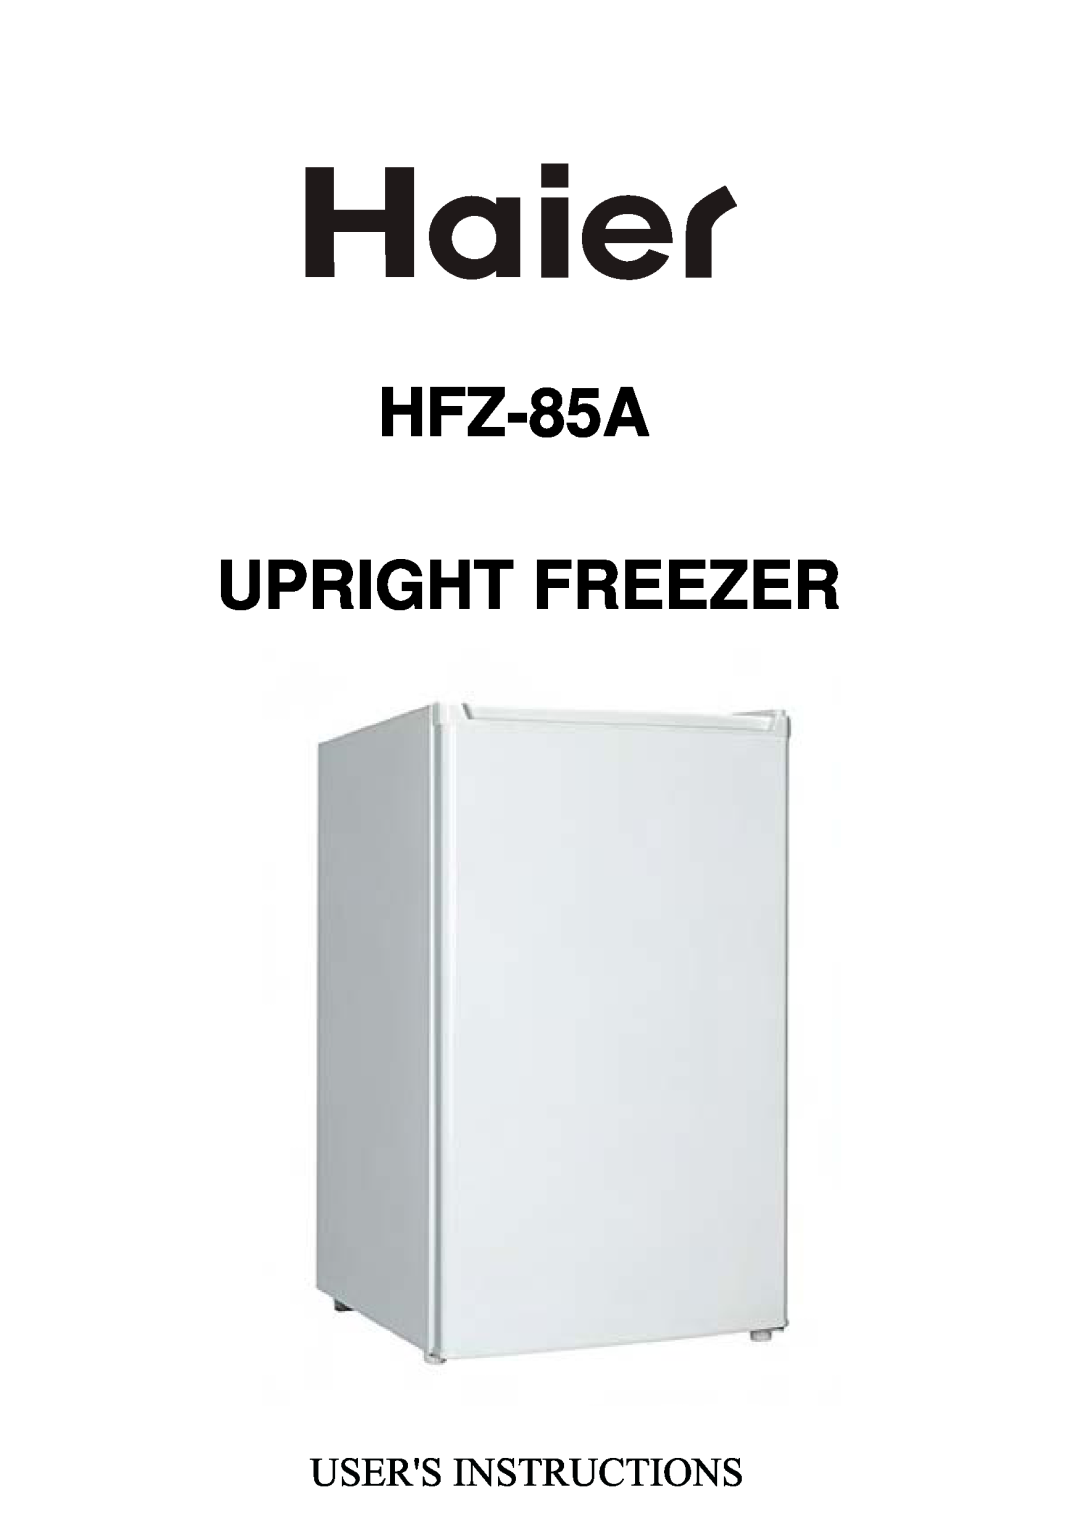 Haier Not AvailableHfz-85a manual HFZ-85A UPRIGHT FREEZER 